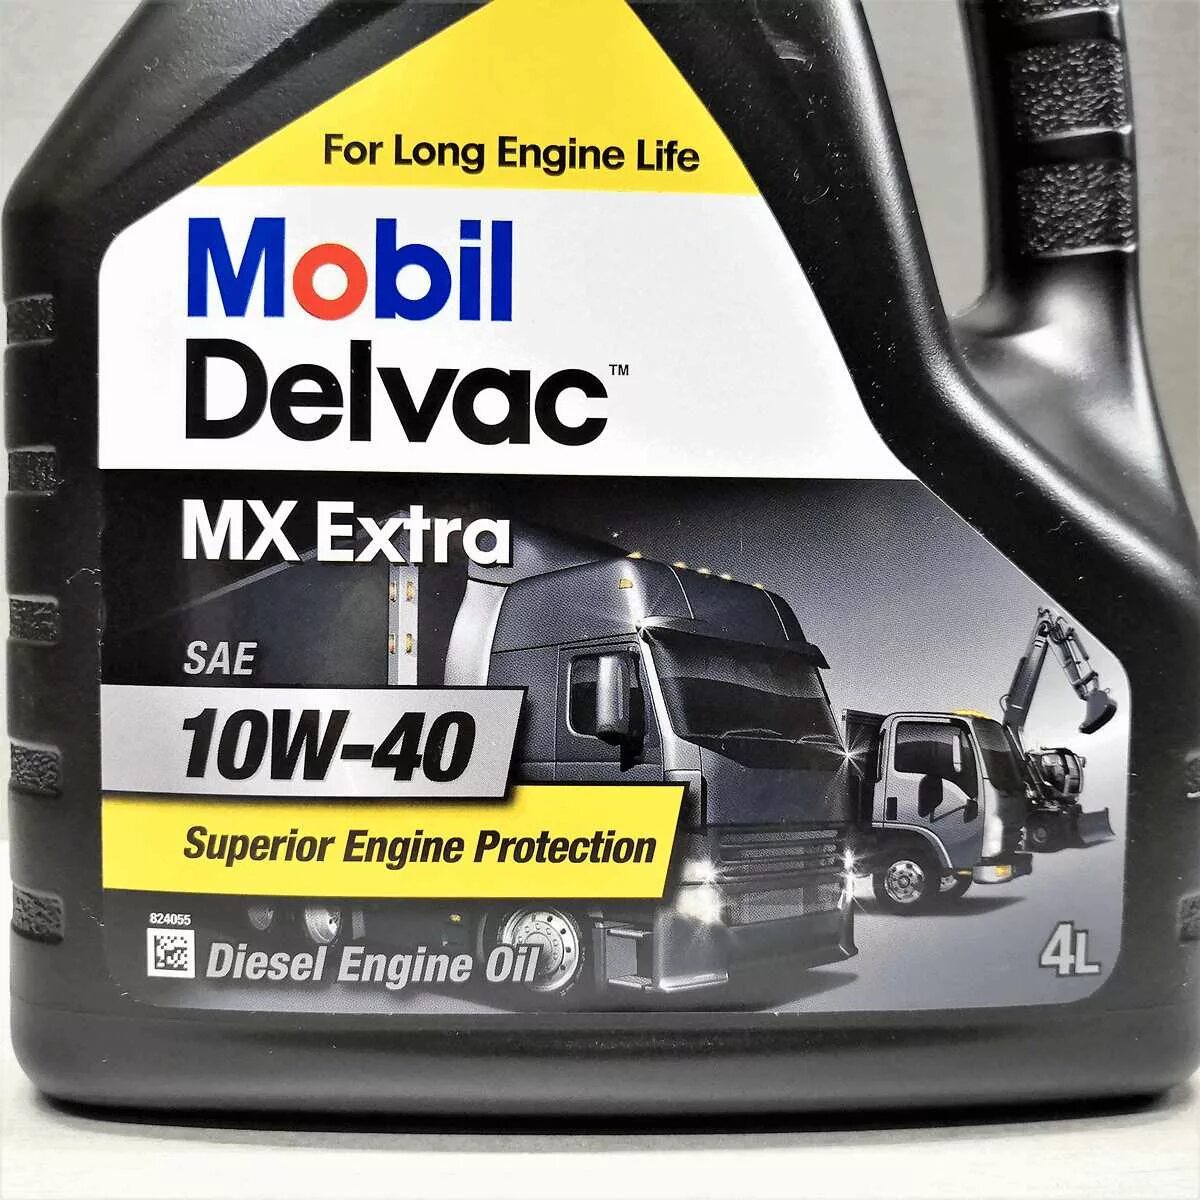 Масло mobil delvac extra 10w 40. Мобил Делвак МХ Экстра 10w 40. Масло моторное mobil Delvac MX Extra 10w 40. Mobil Delvac MX Extra 10w 40 20 л 152673. Мобил Делвак 10w 40 4.